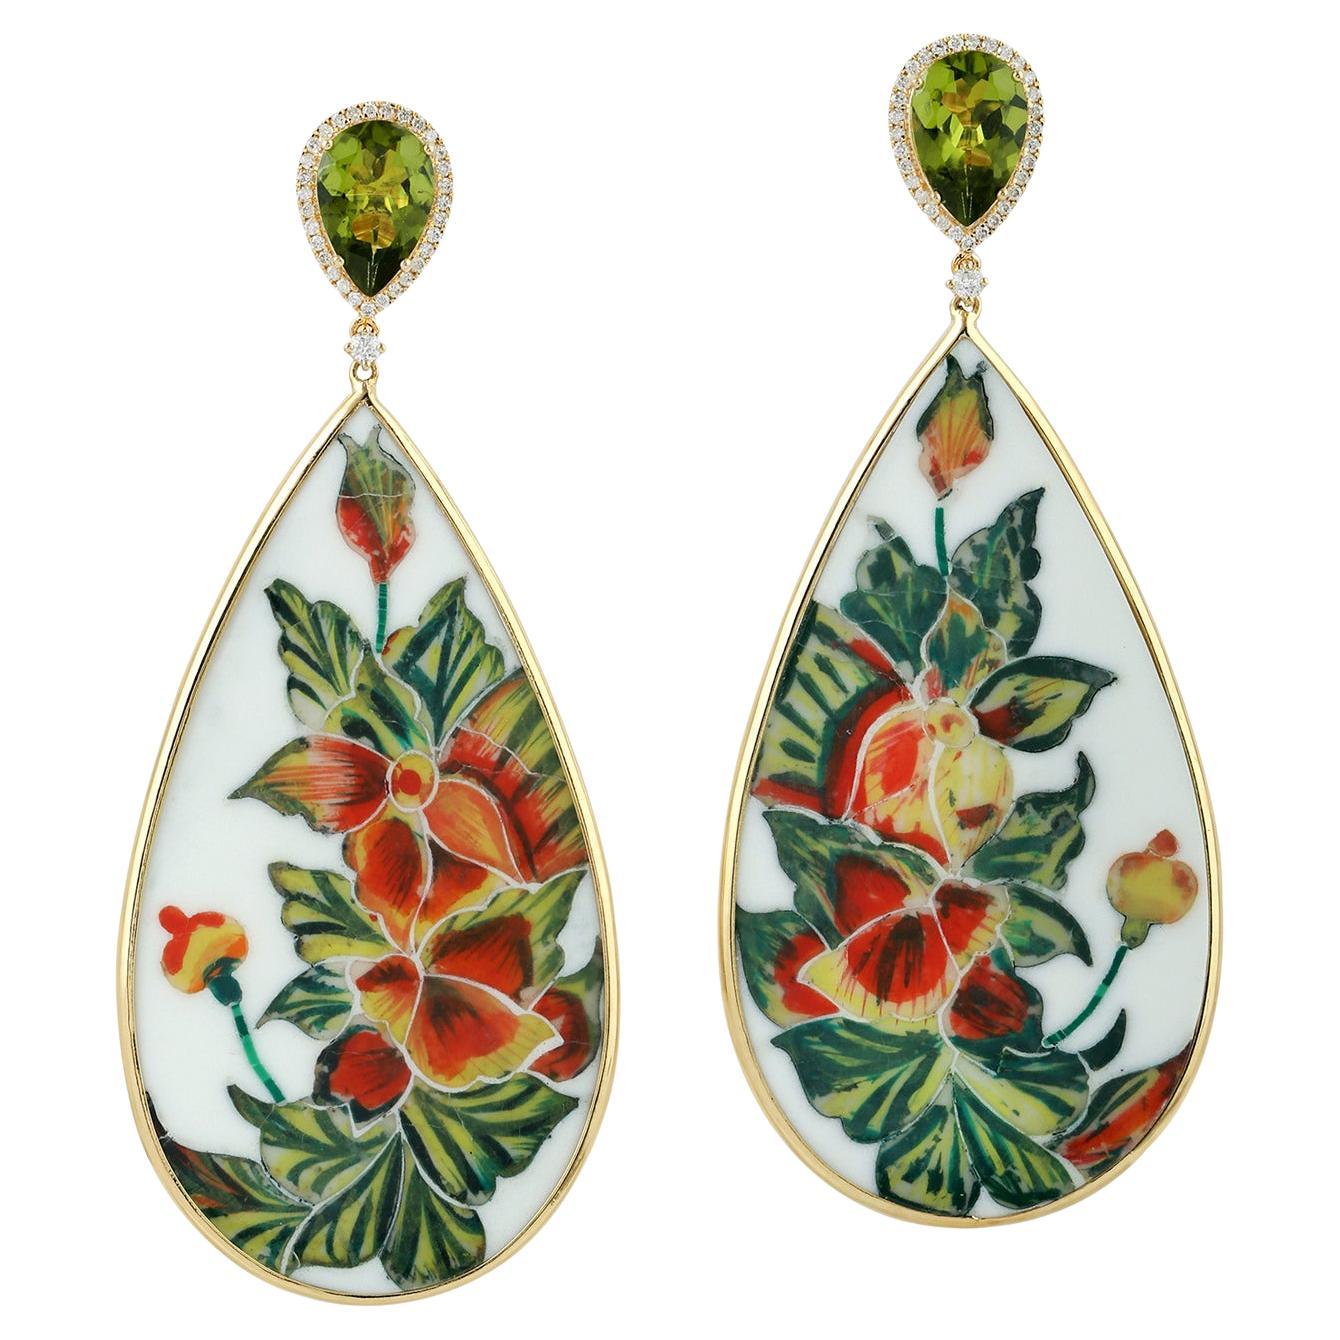 Hand Painted Flower Painting On pear Shaped Bakelite Earrings With Peridot For Sale